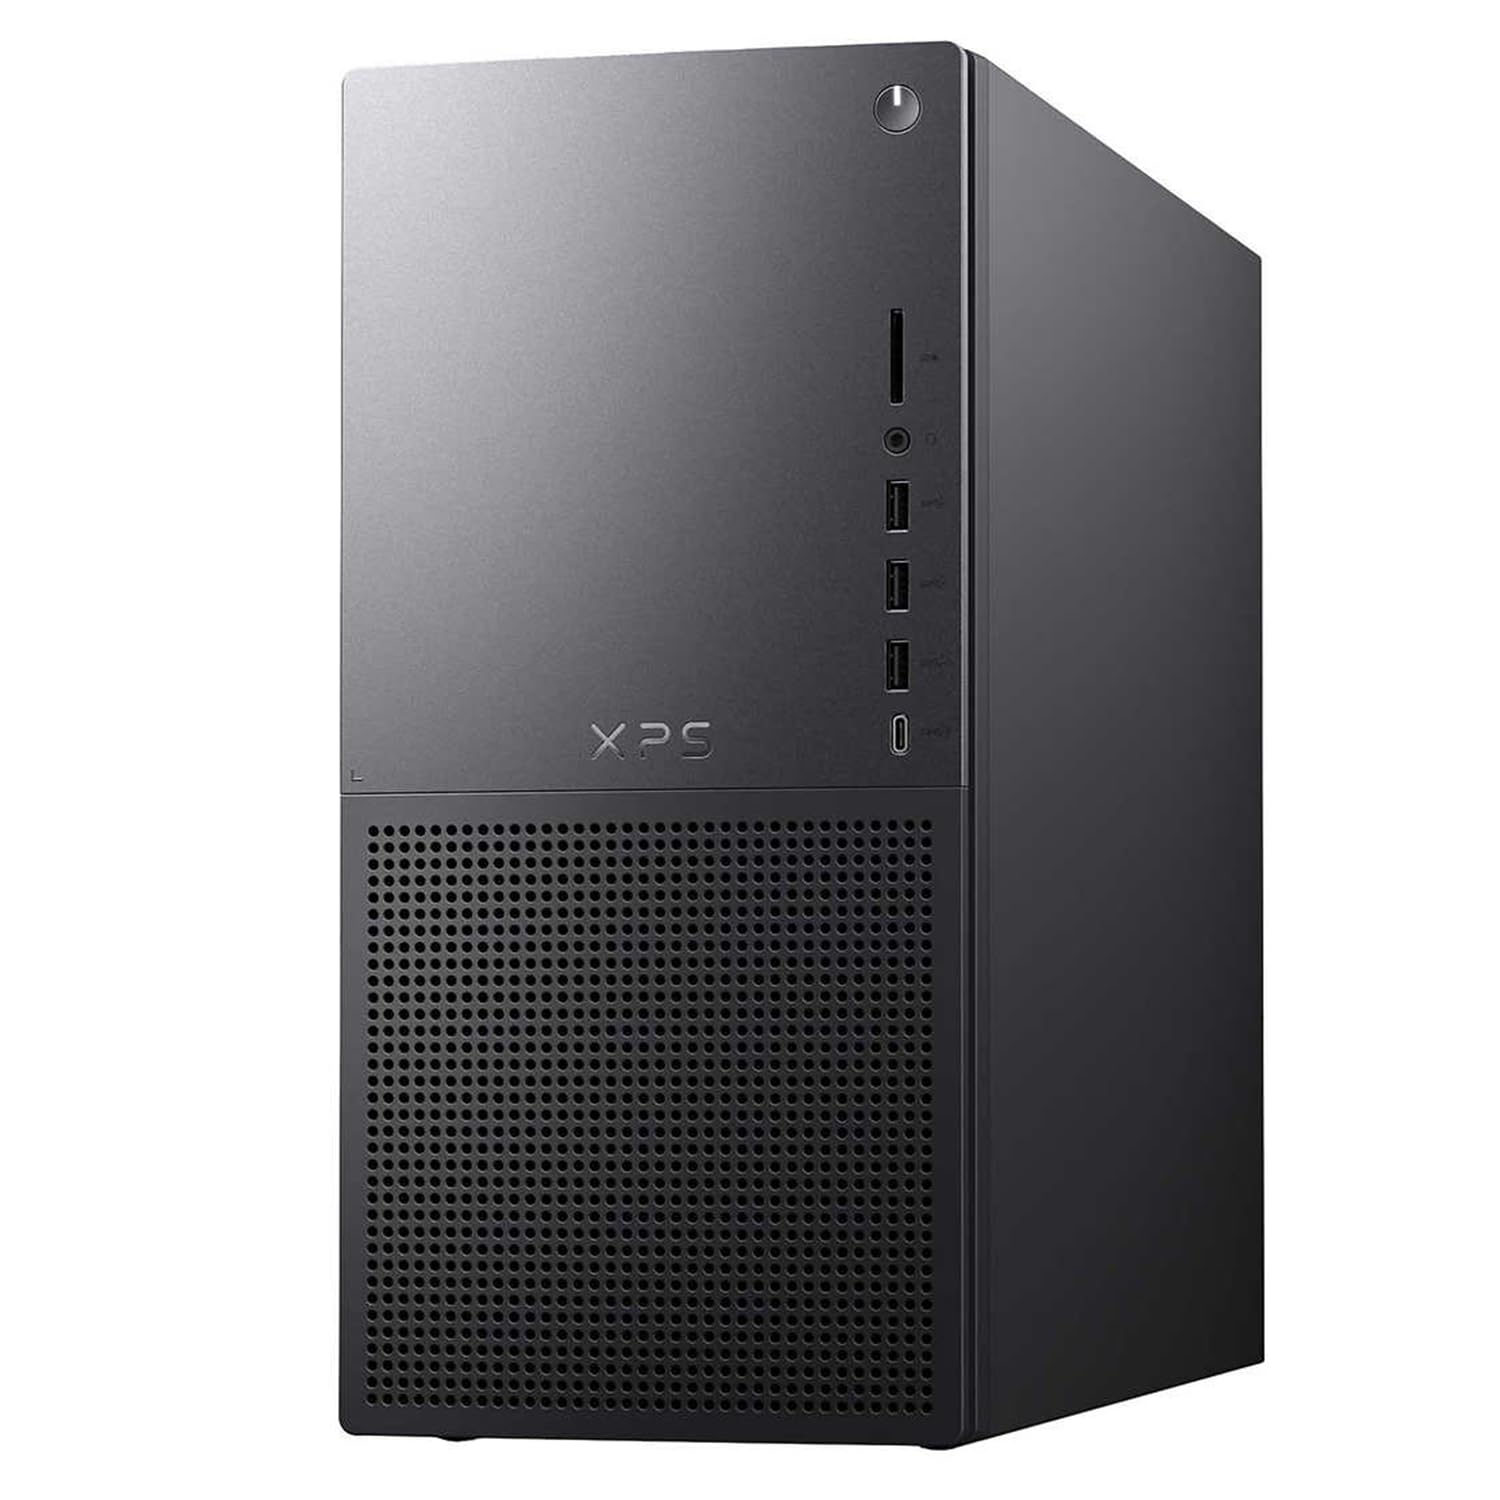 Dell Newest XPS 8960 Tower Desktop Computer, Intel Core i7-13700, 32GB DDR5 RAM, 2TB SSD, DisplayPort, Killer Wi-Fi 6, Wired Keyboard&Mouse, Windows 11 Home